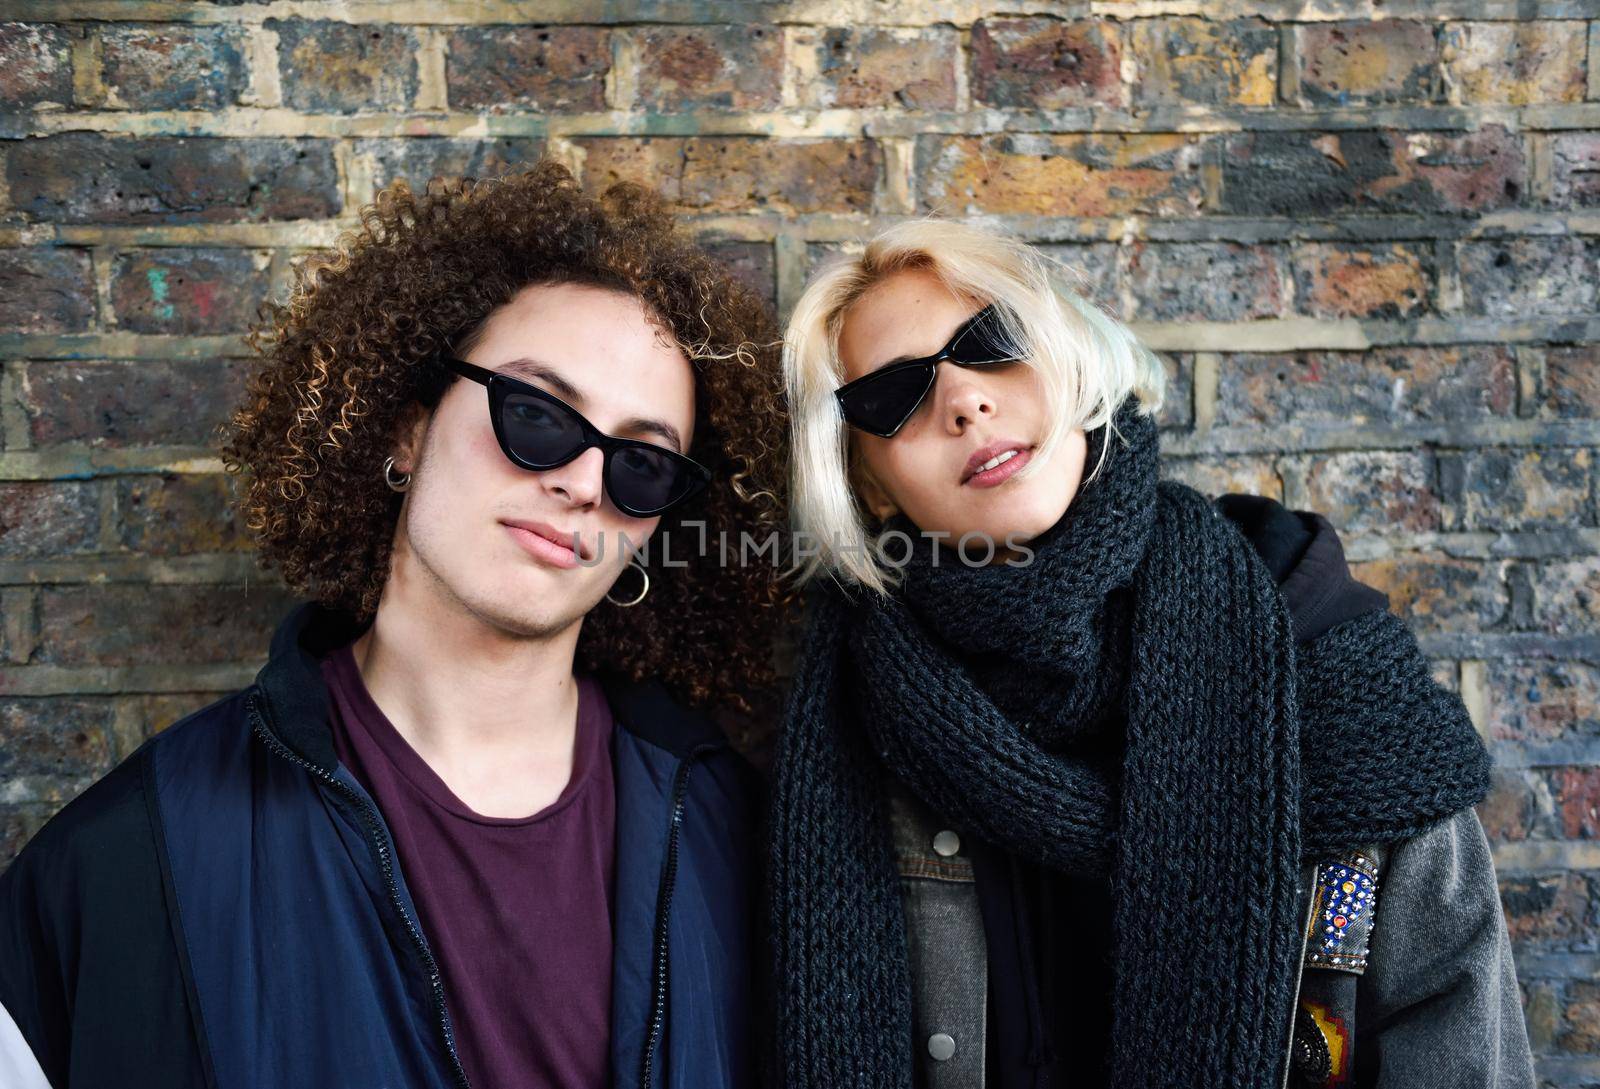 Young couple enjoying Camden town in front of a brick wall typical of London, UK